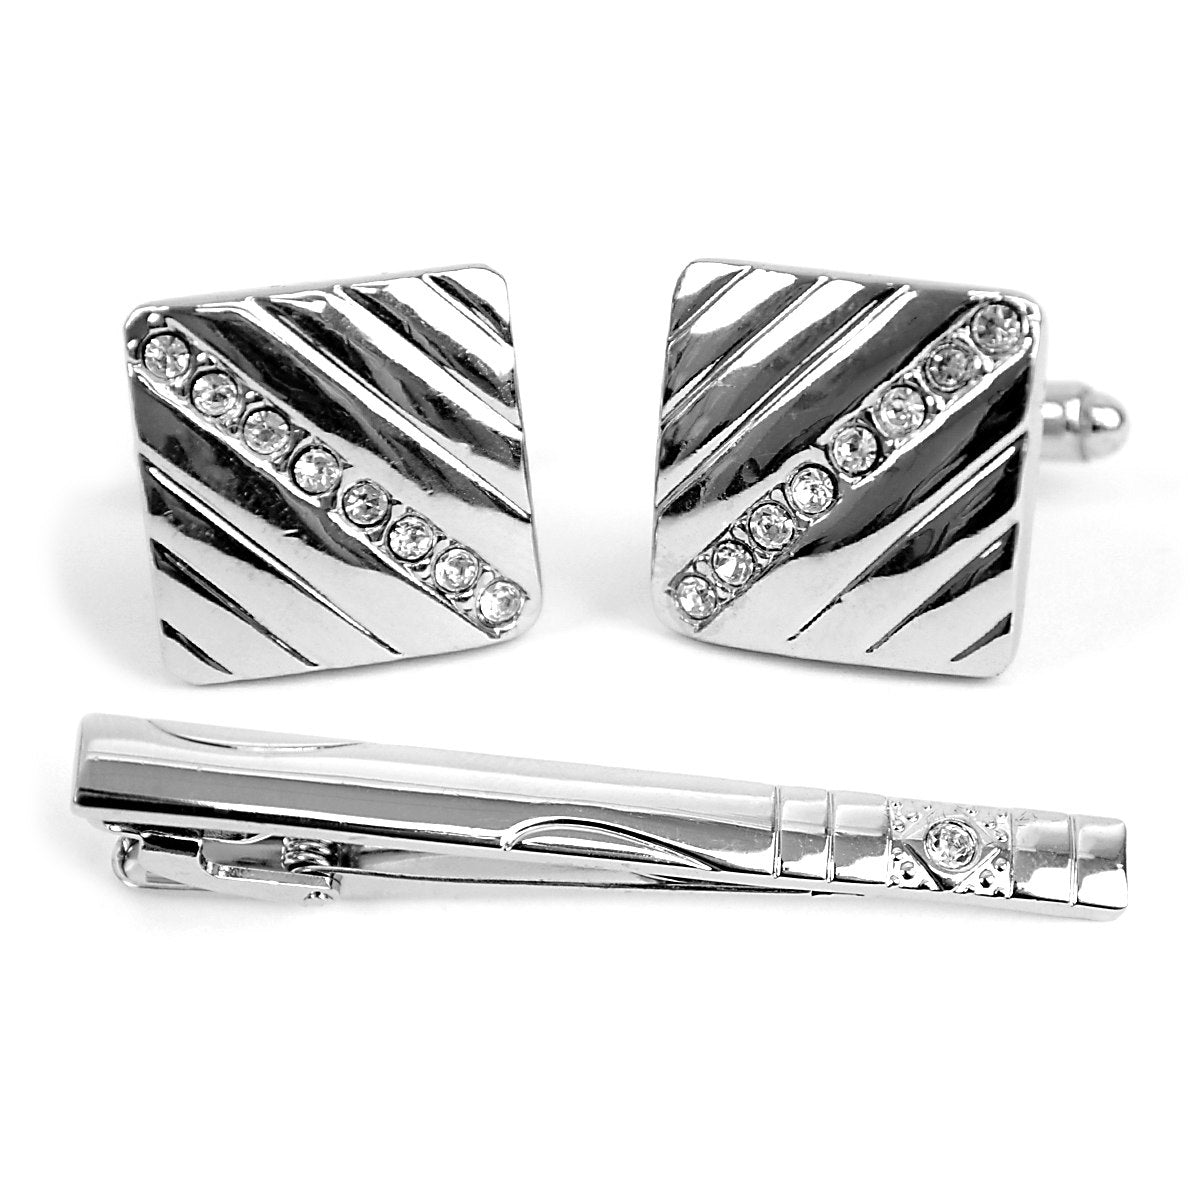 Cuff-link and Tie Bar Set CTB2304 - Church Suits For Less